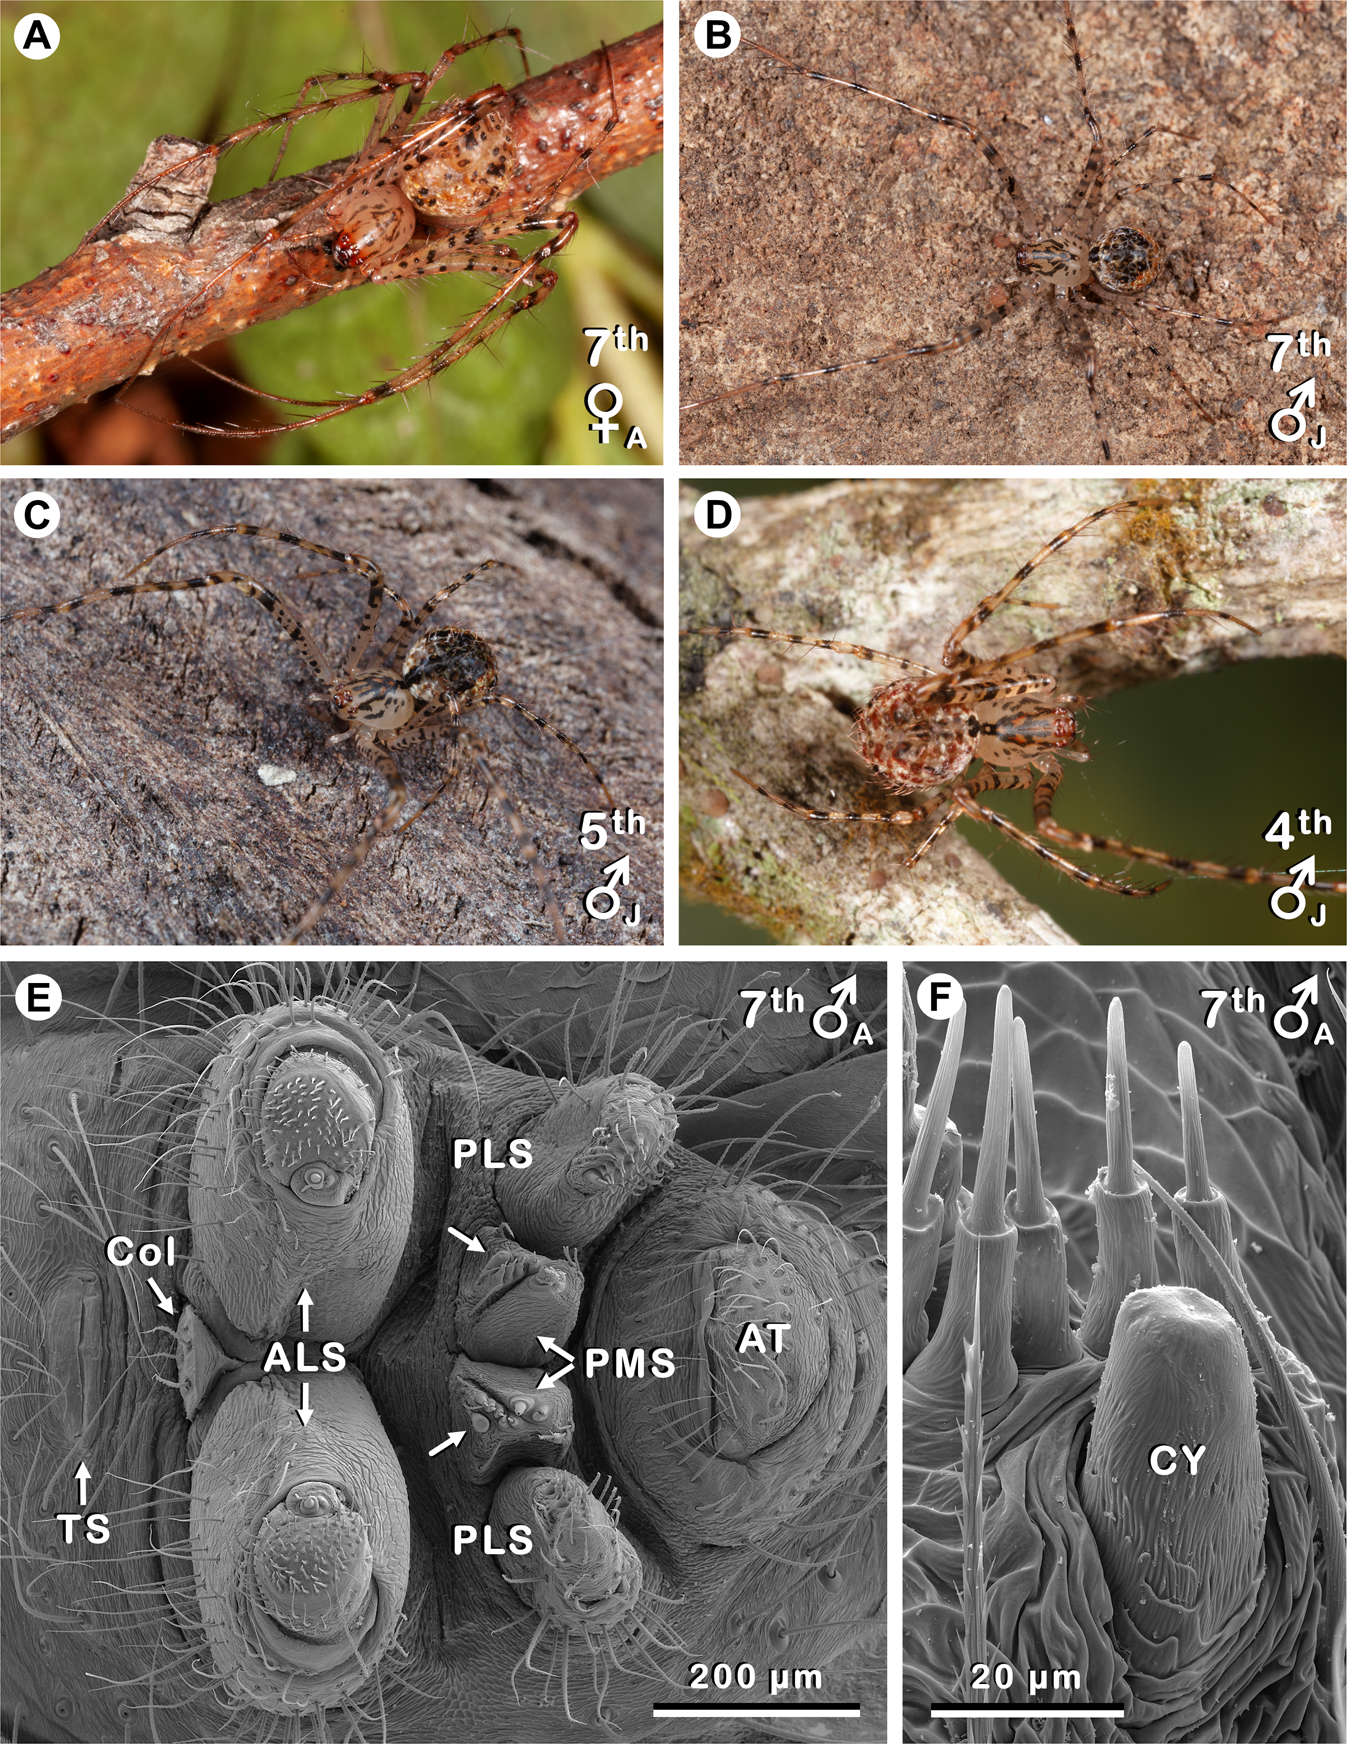 Hers and his: Silk glands used in egg sac construction by female spiders  potentially repurposed by a 'modern' male spider | Scientific Reports